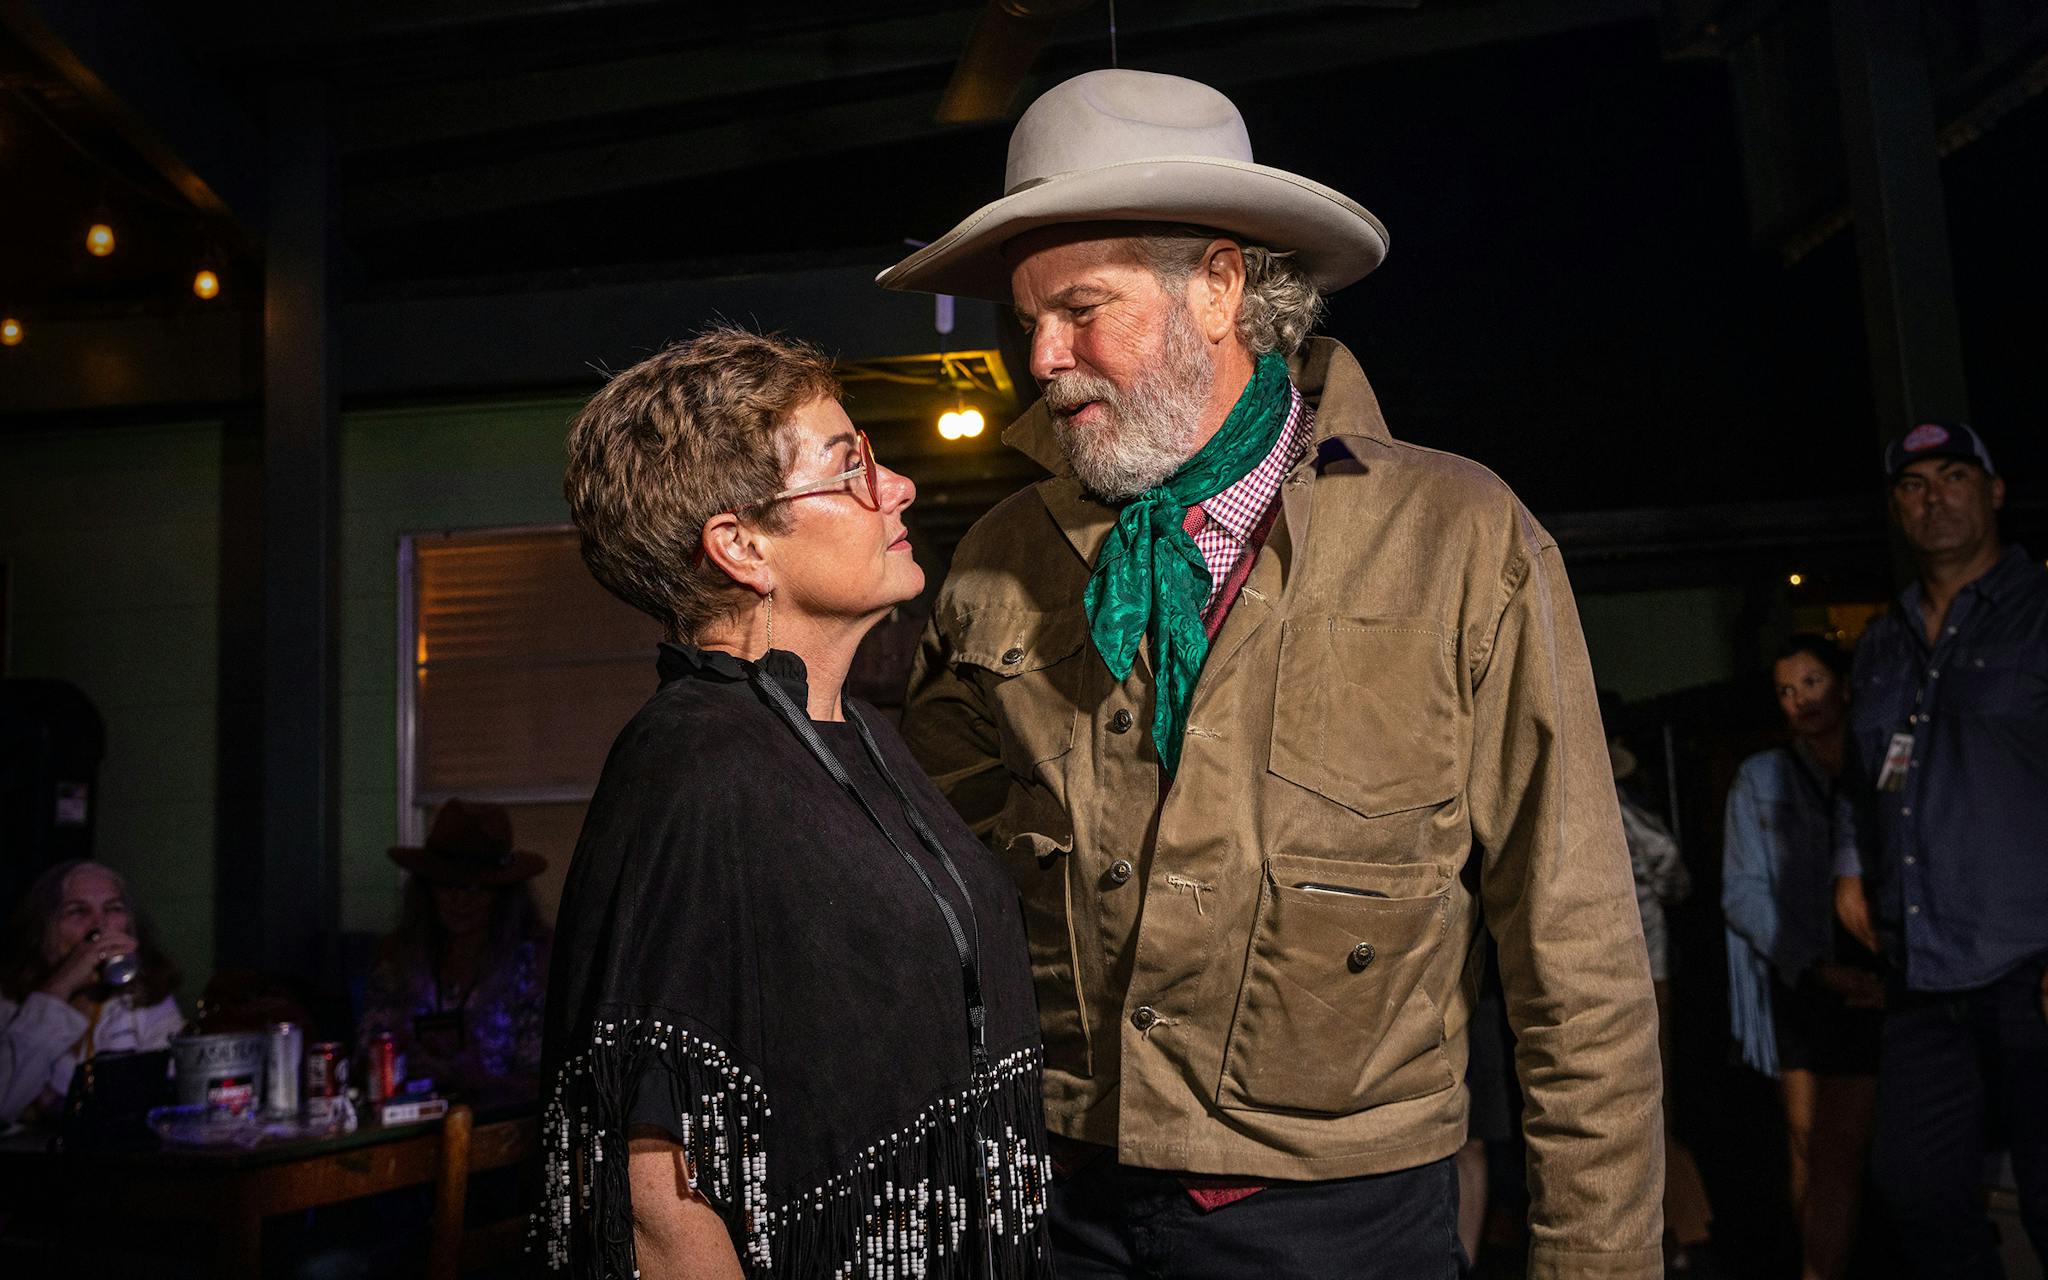 Robert Earl Keen and his wife Kathleen Keen talk before he takes the stage at John T. Floore’s Country Store in Helotes, Texas, for his second to last show on Sept. 3, 2022.